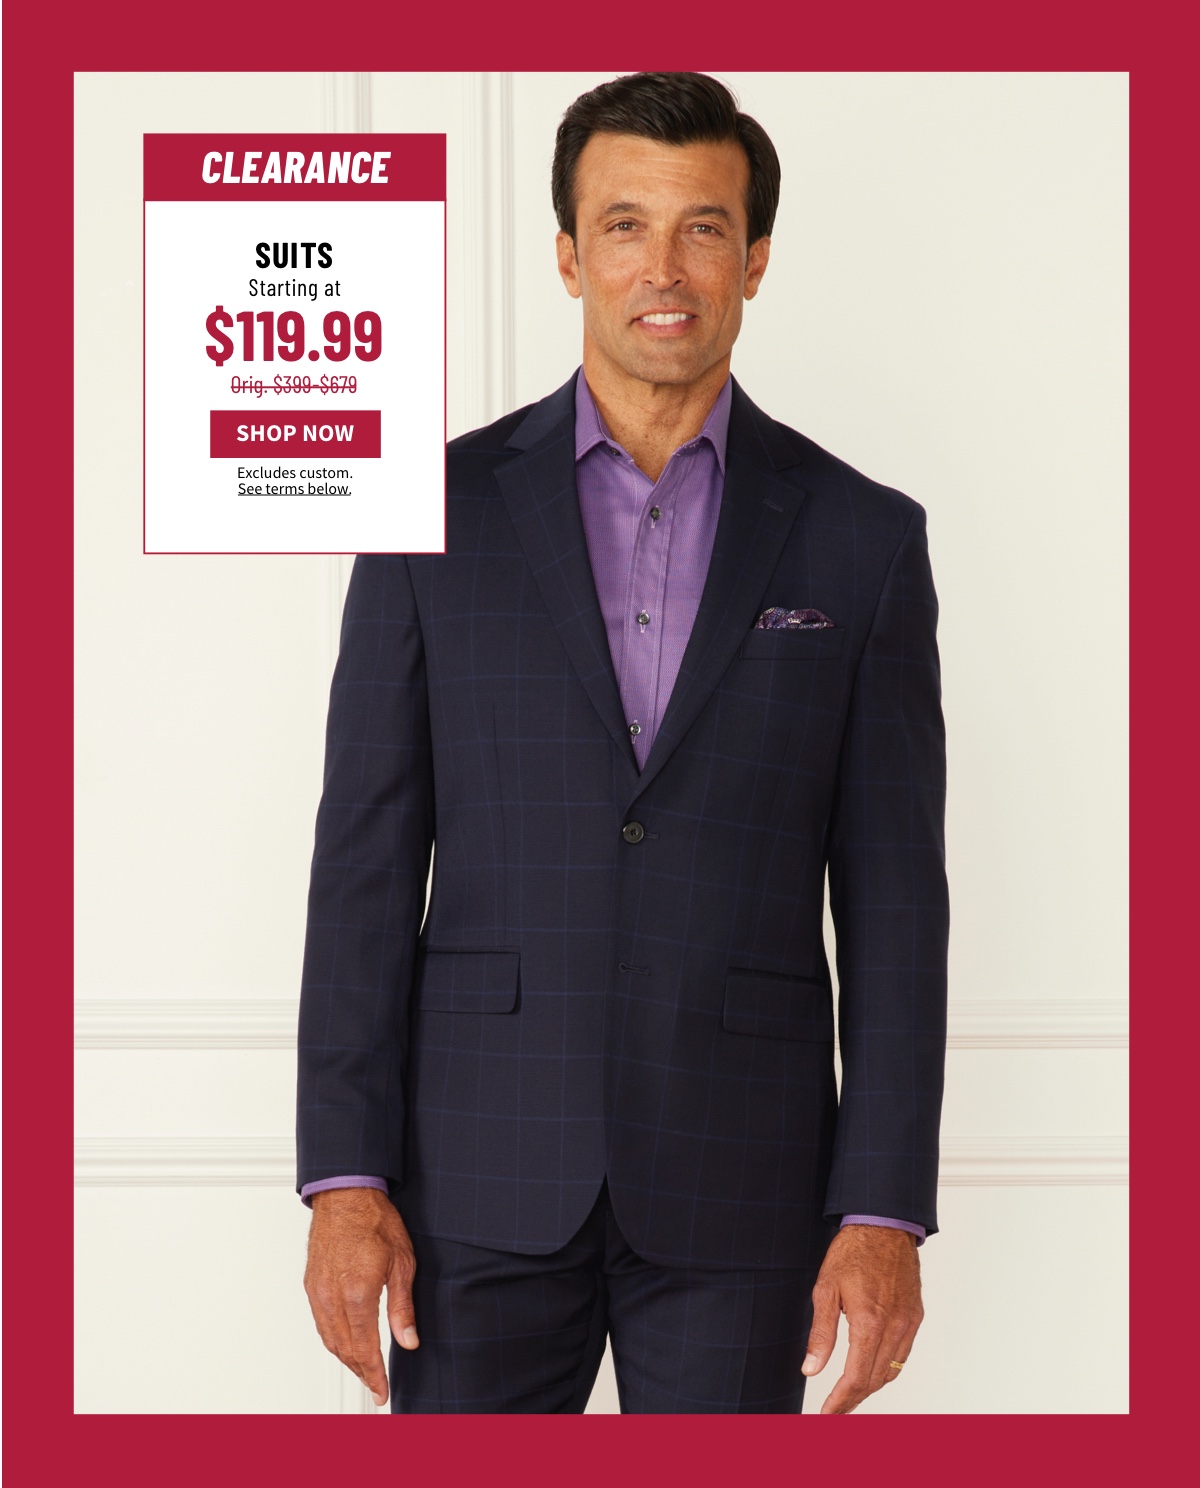 Clearance Suits Starting at $119.99 Orig. $399-$679 Shop Now Excludes custom. See terms below.